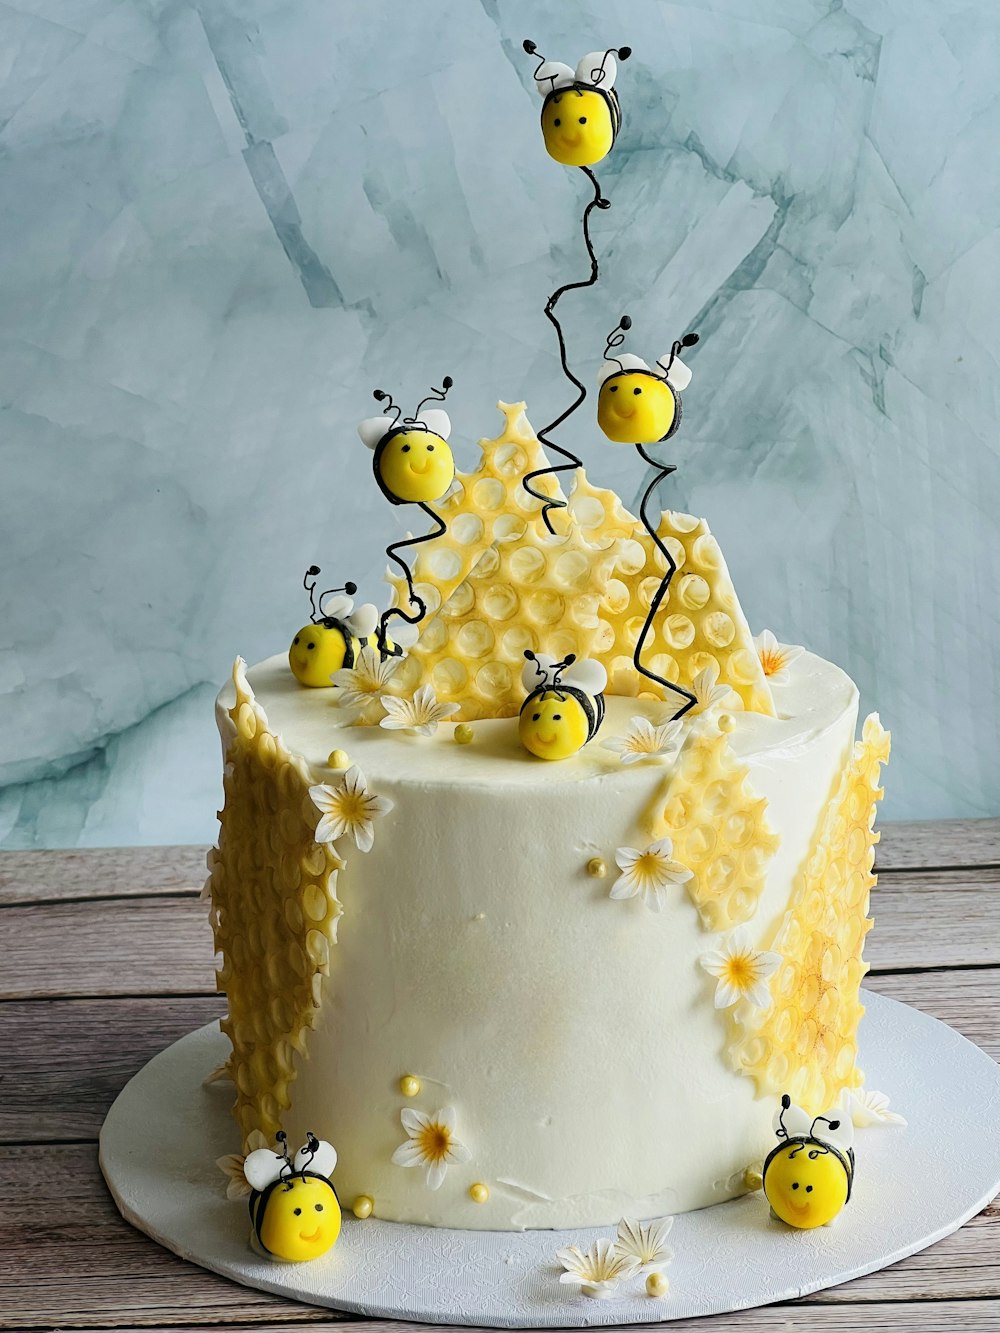 a cake decorated with bees and daisies on a plate